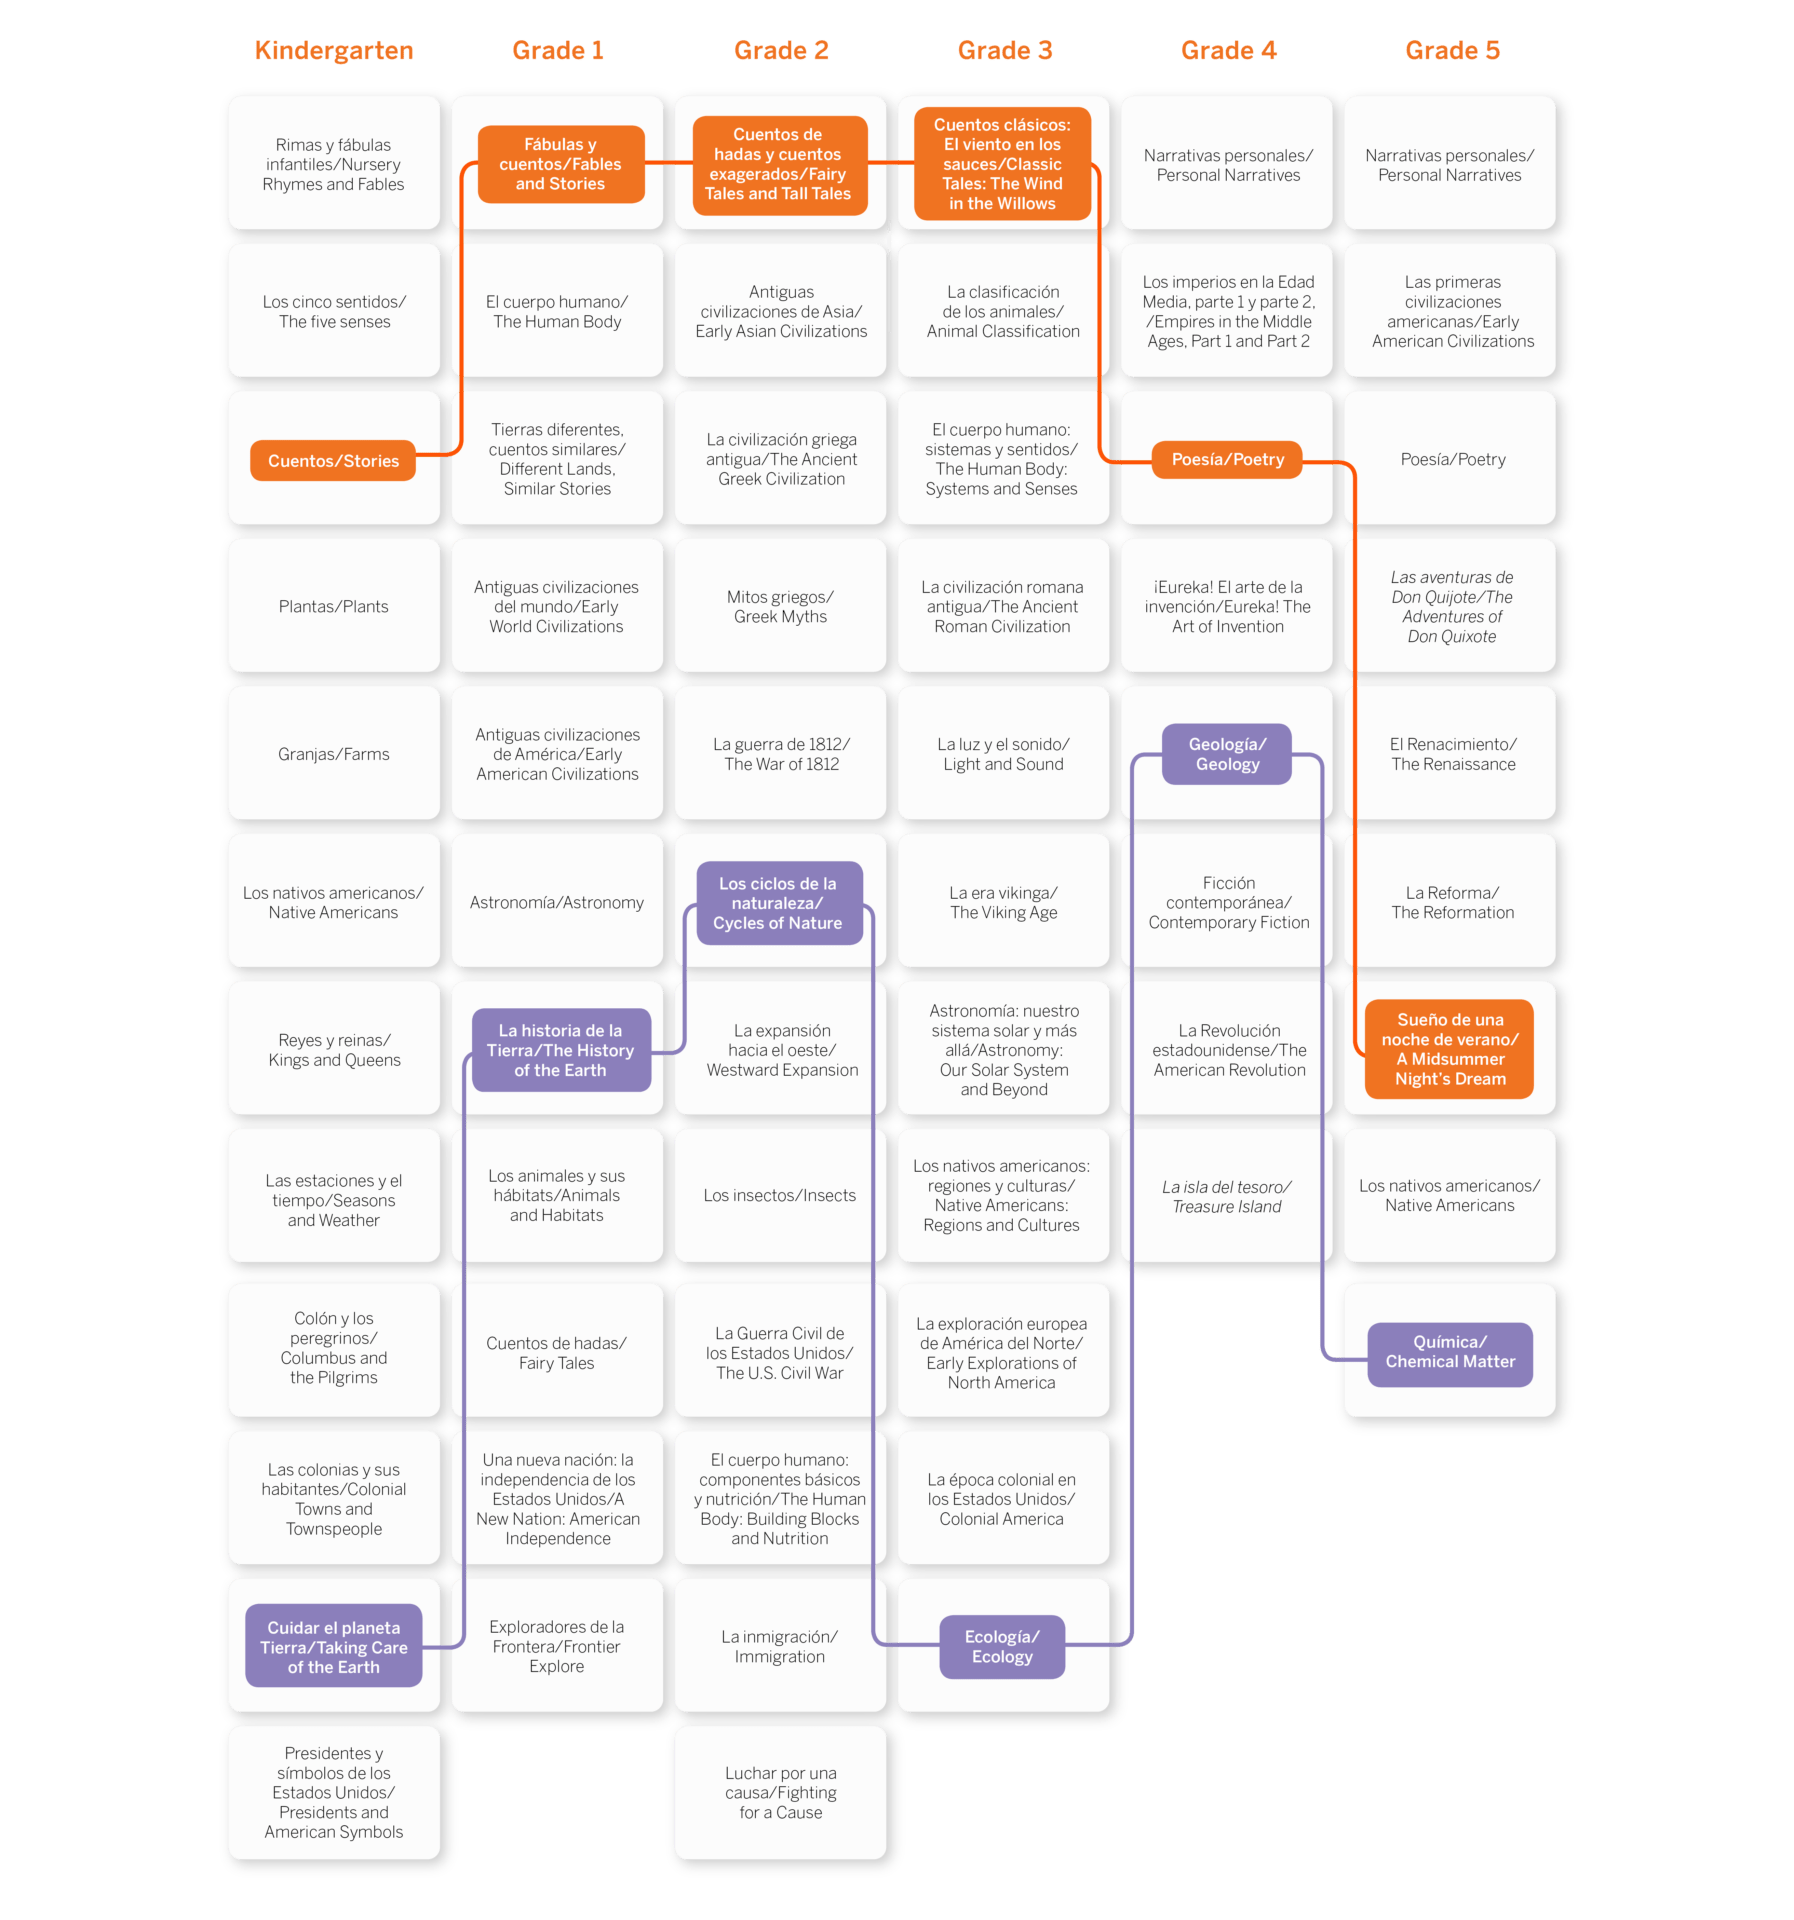 Flowchart of a k-5 language curriculum, categorizing grades kindergarten through 5 into various skills and content areas, illustrated in a multi-color, structured layout.